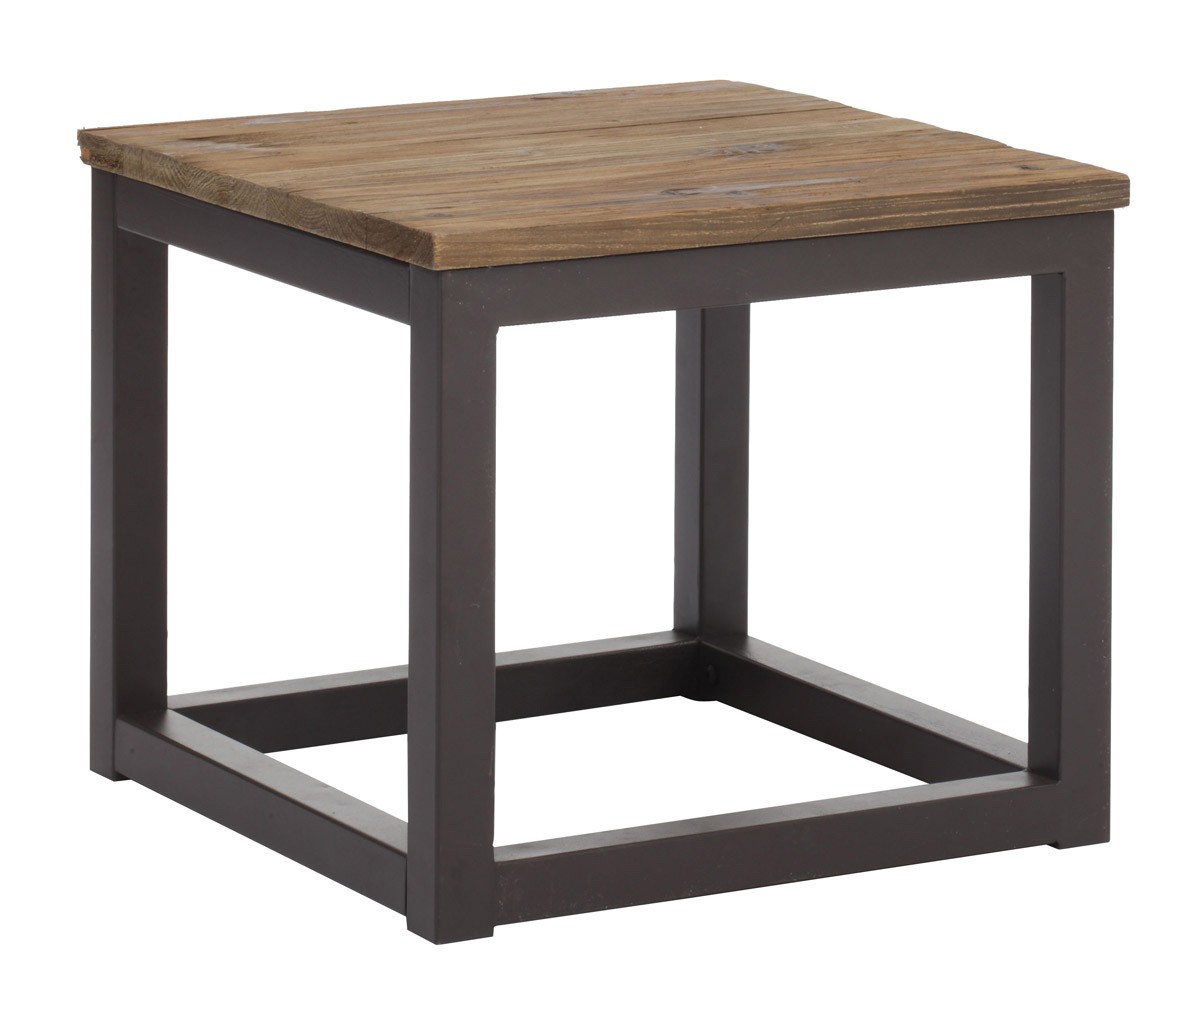 Zuo Modern Civic Center Side Table - Distressed Natural